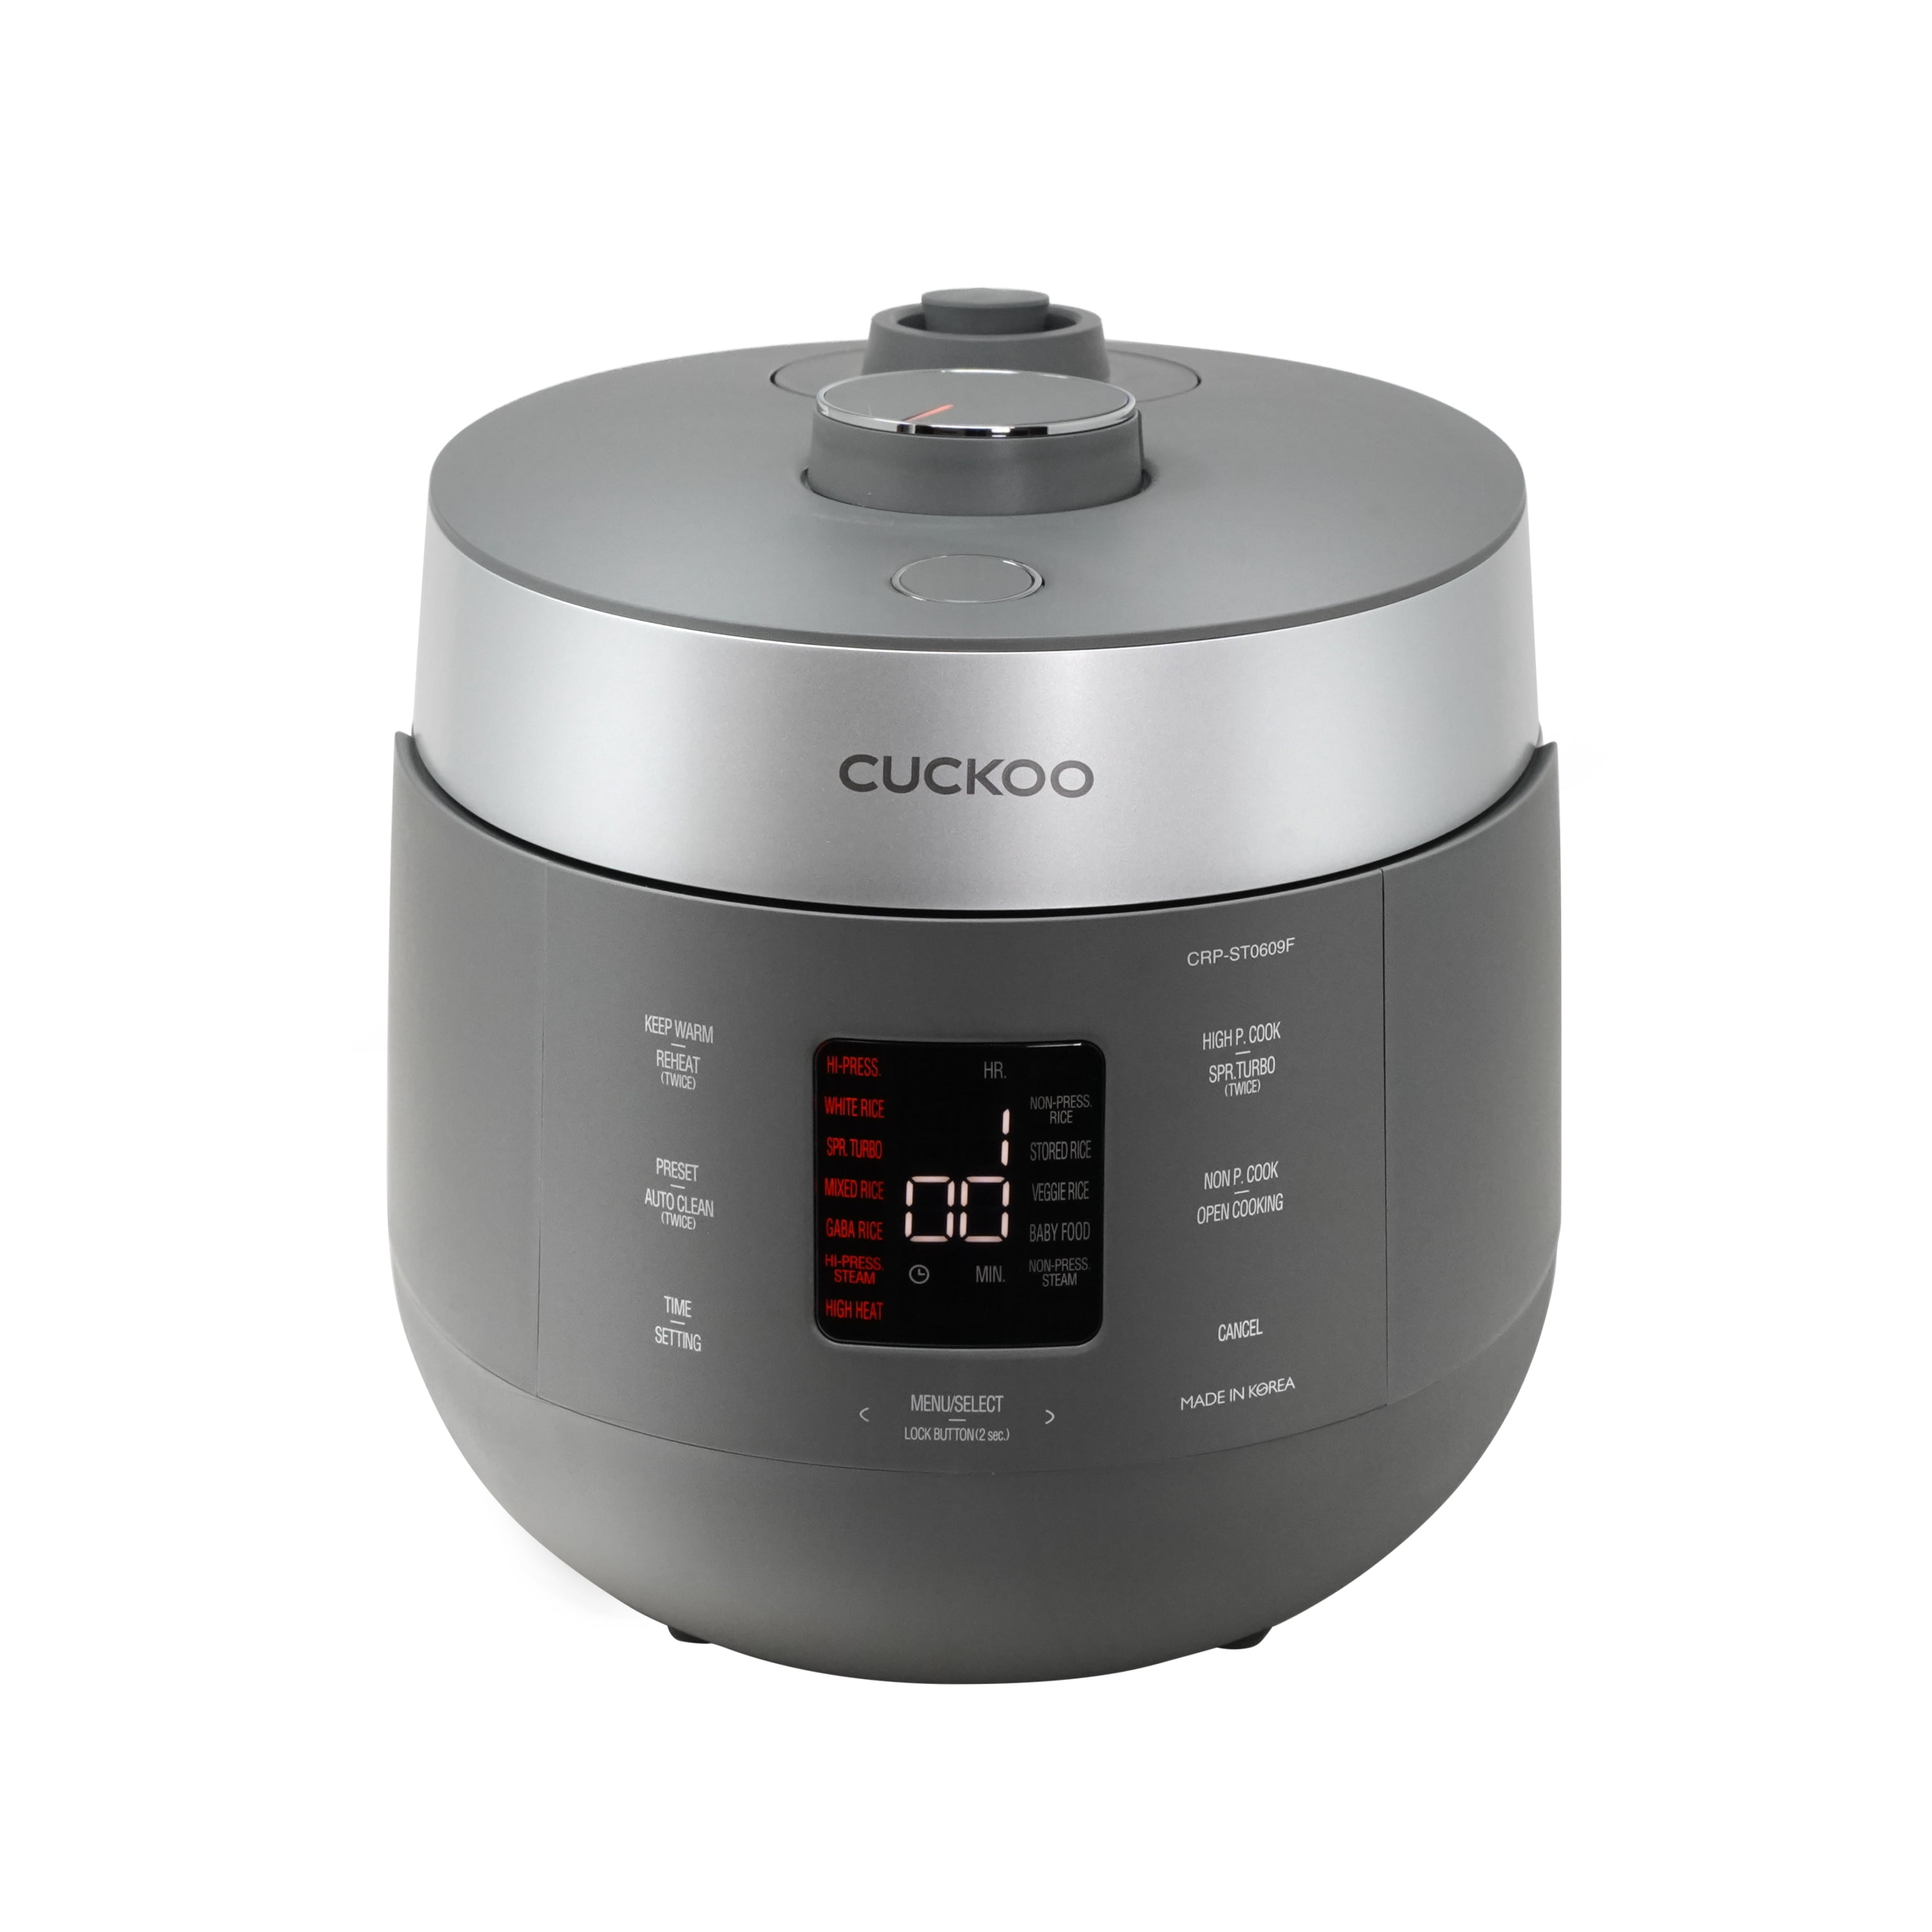  CUCKOO Pressure Cooker 10 Menu Options: Steamer, Slow Cook,  Sauté, Porridge, & More, User-Friendly LED Display, Stainless Steel Inner  Pot, 24 Cup / 6 Qt. (Uncooked) CMC-ZSN601F Black: Home & Kitchen